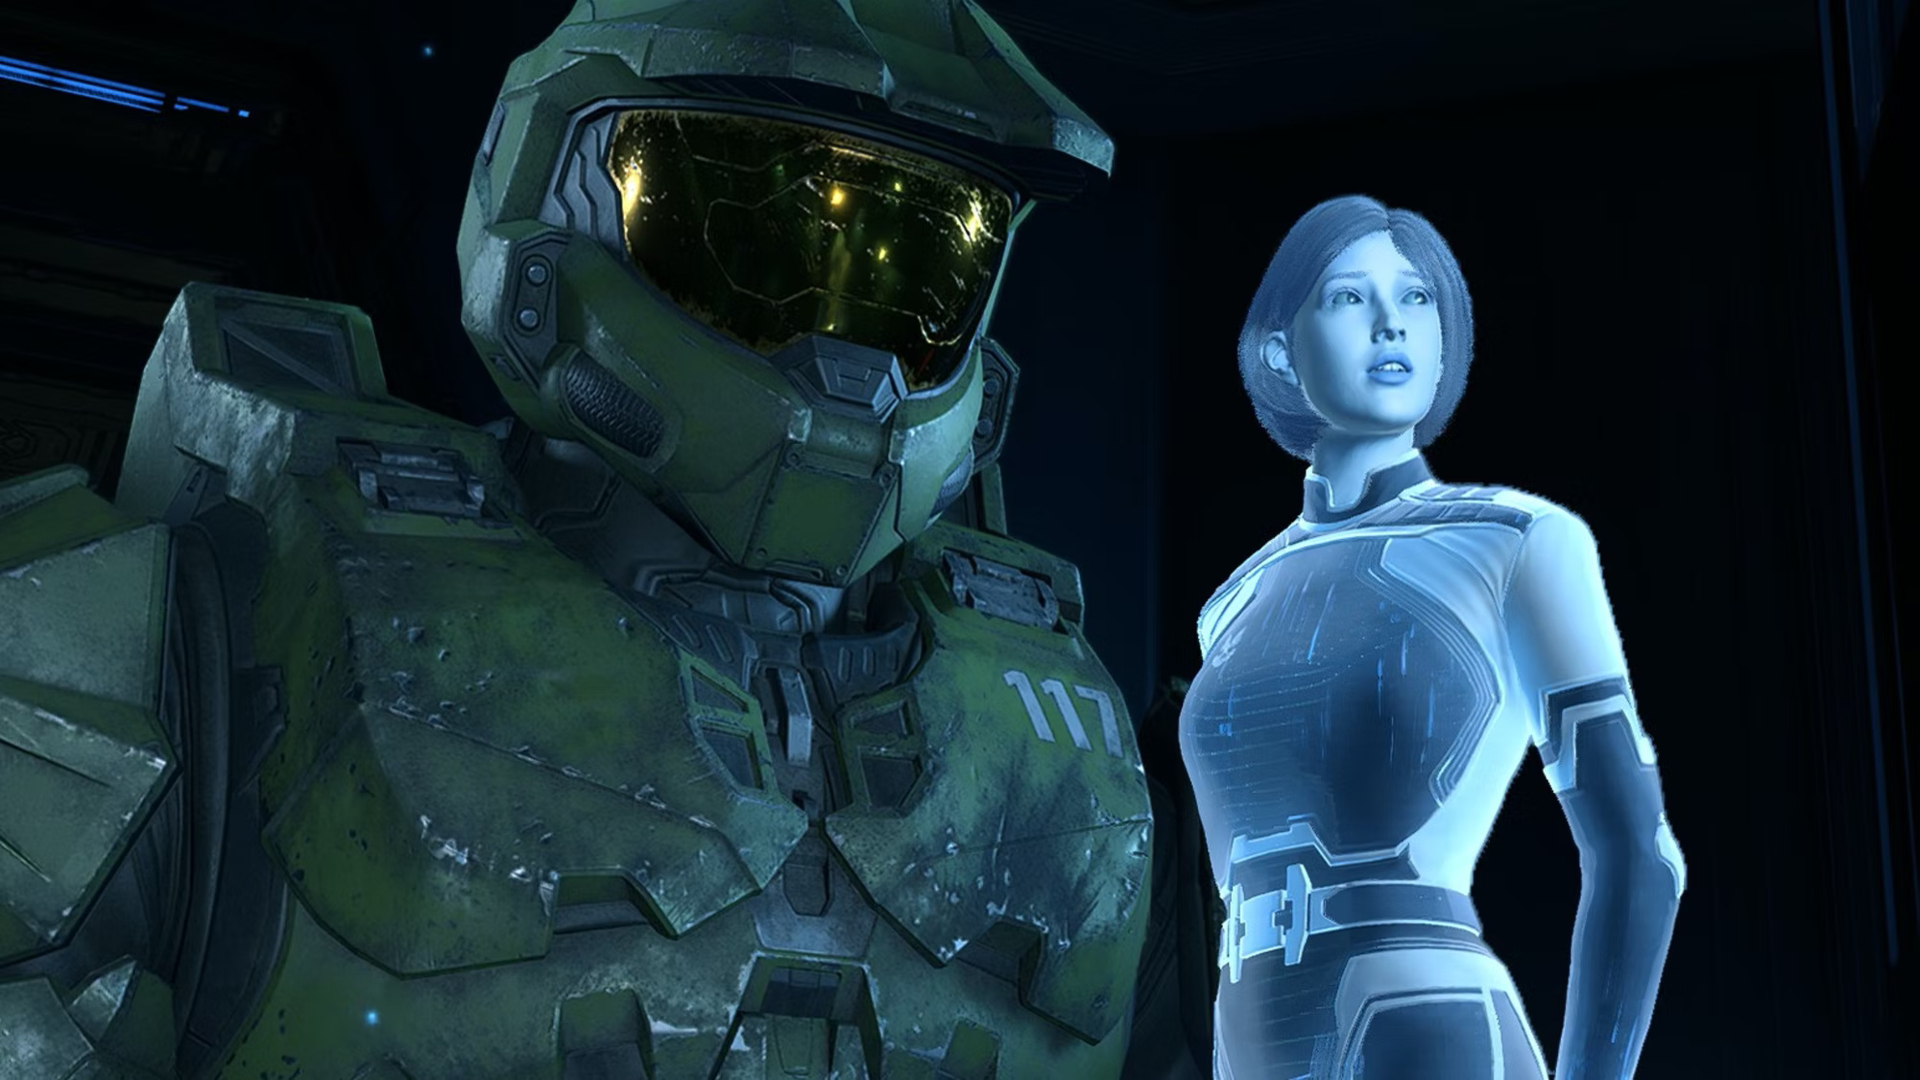 Master Chief and Cortana side by side